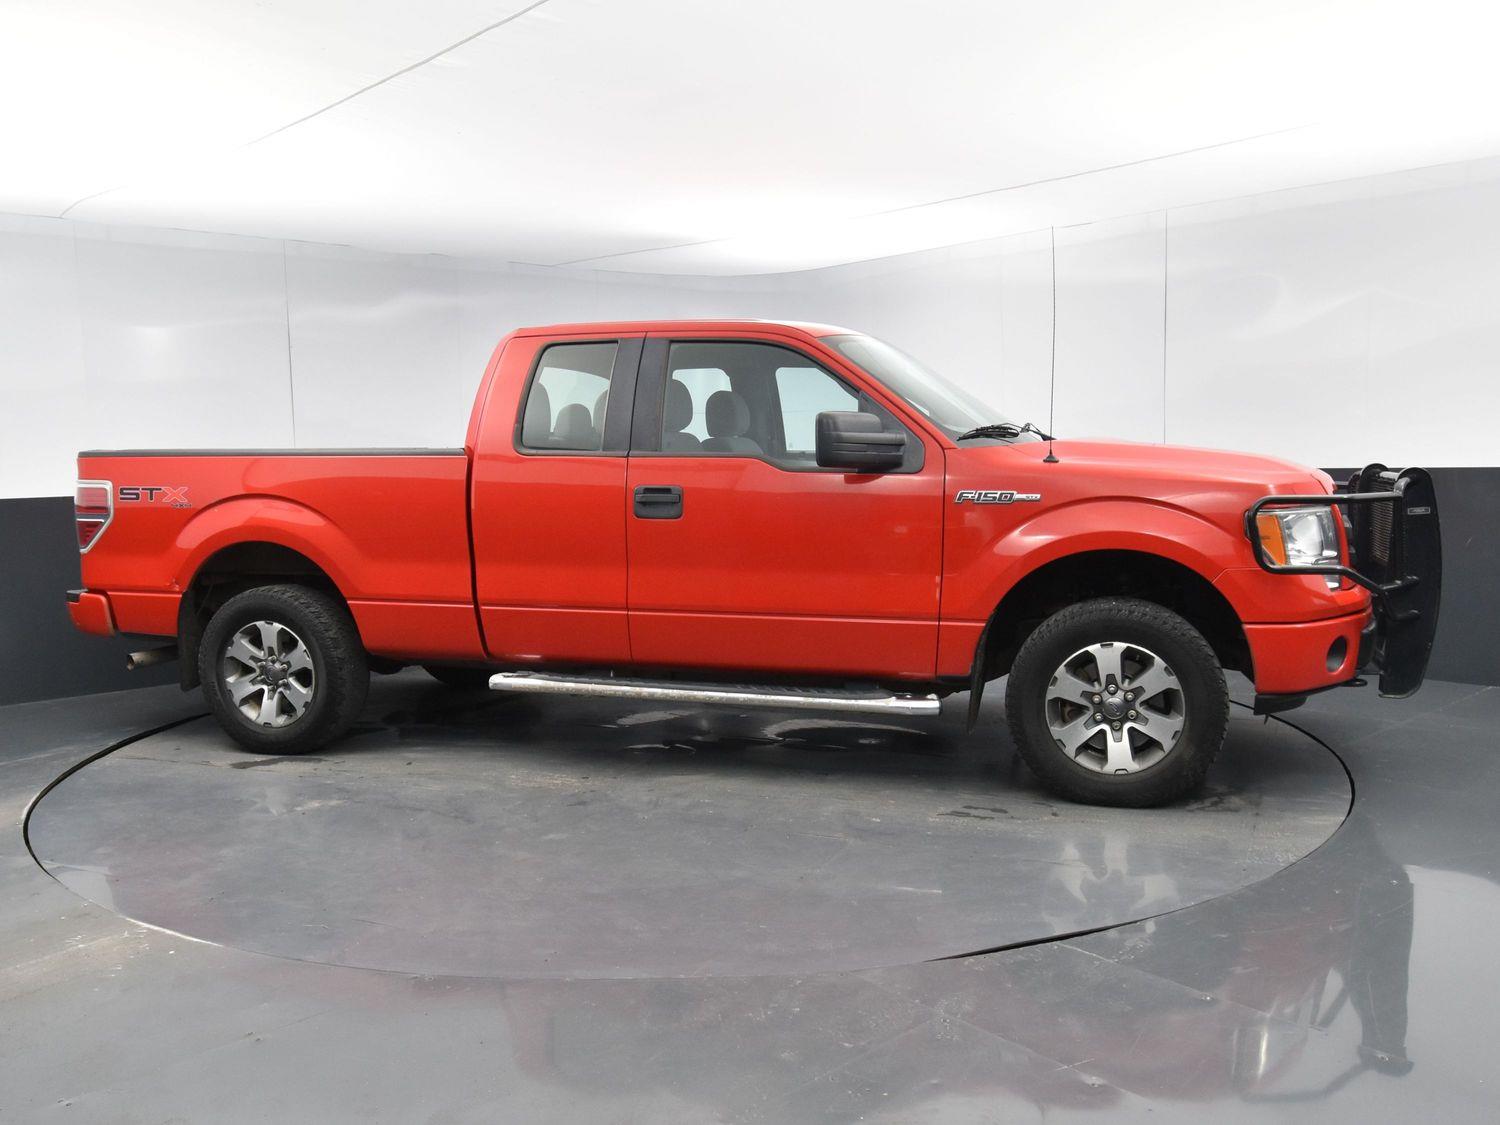 Used 2012 Ford F-150 STX Extended Cab Truck for sale in Grand Island NE